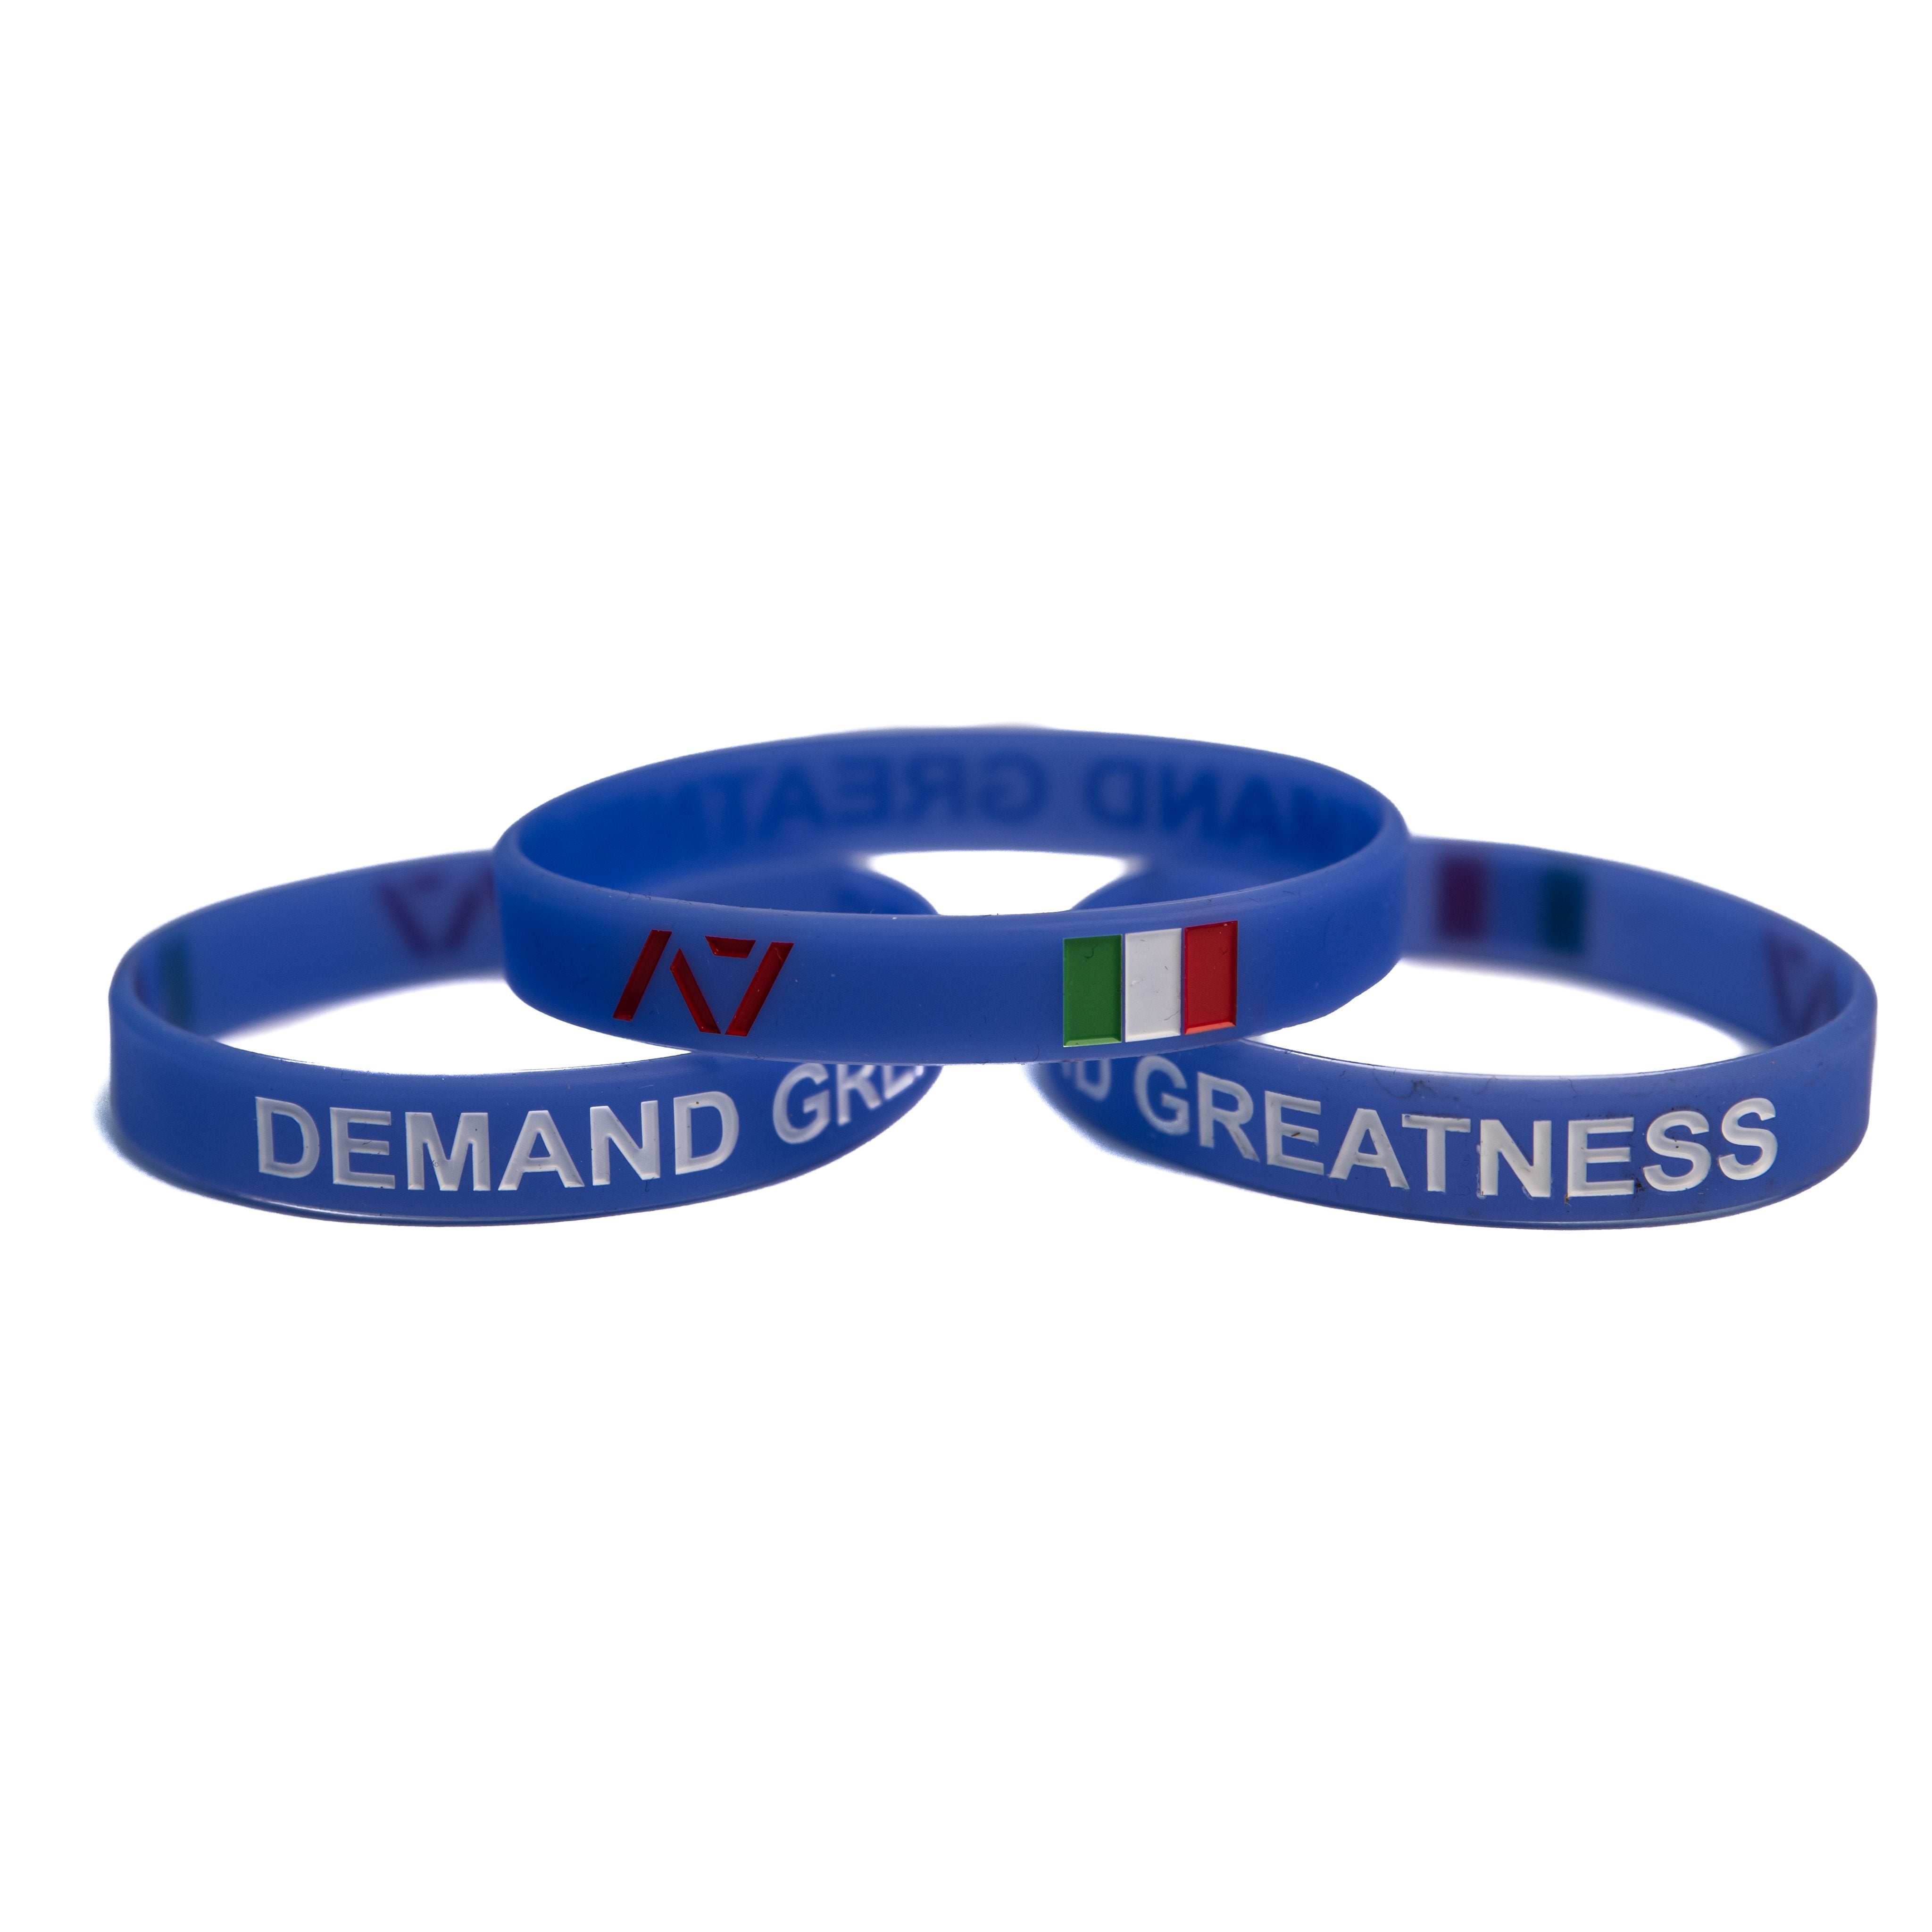 You are always working towards your goals and helping others reach their full potential. Feel the Italian spirit with this country wristband design that incorporates the Italian flag into a wristband and reminds you to always Demand Greatness. The wristband is 1/2 inch wide and features black debossed lettering.